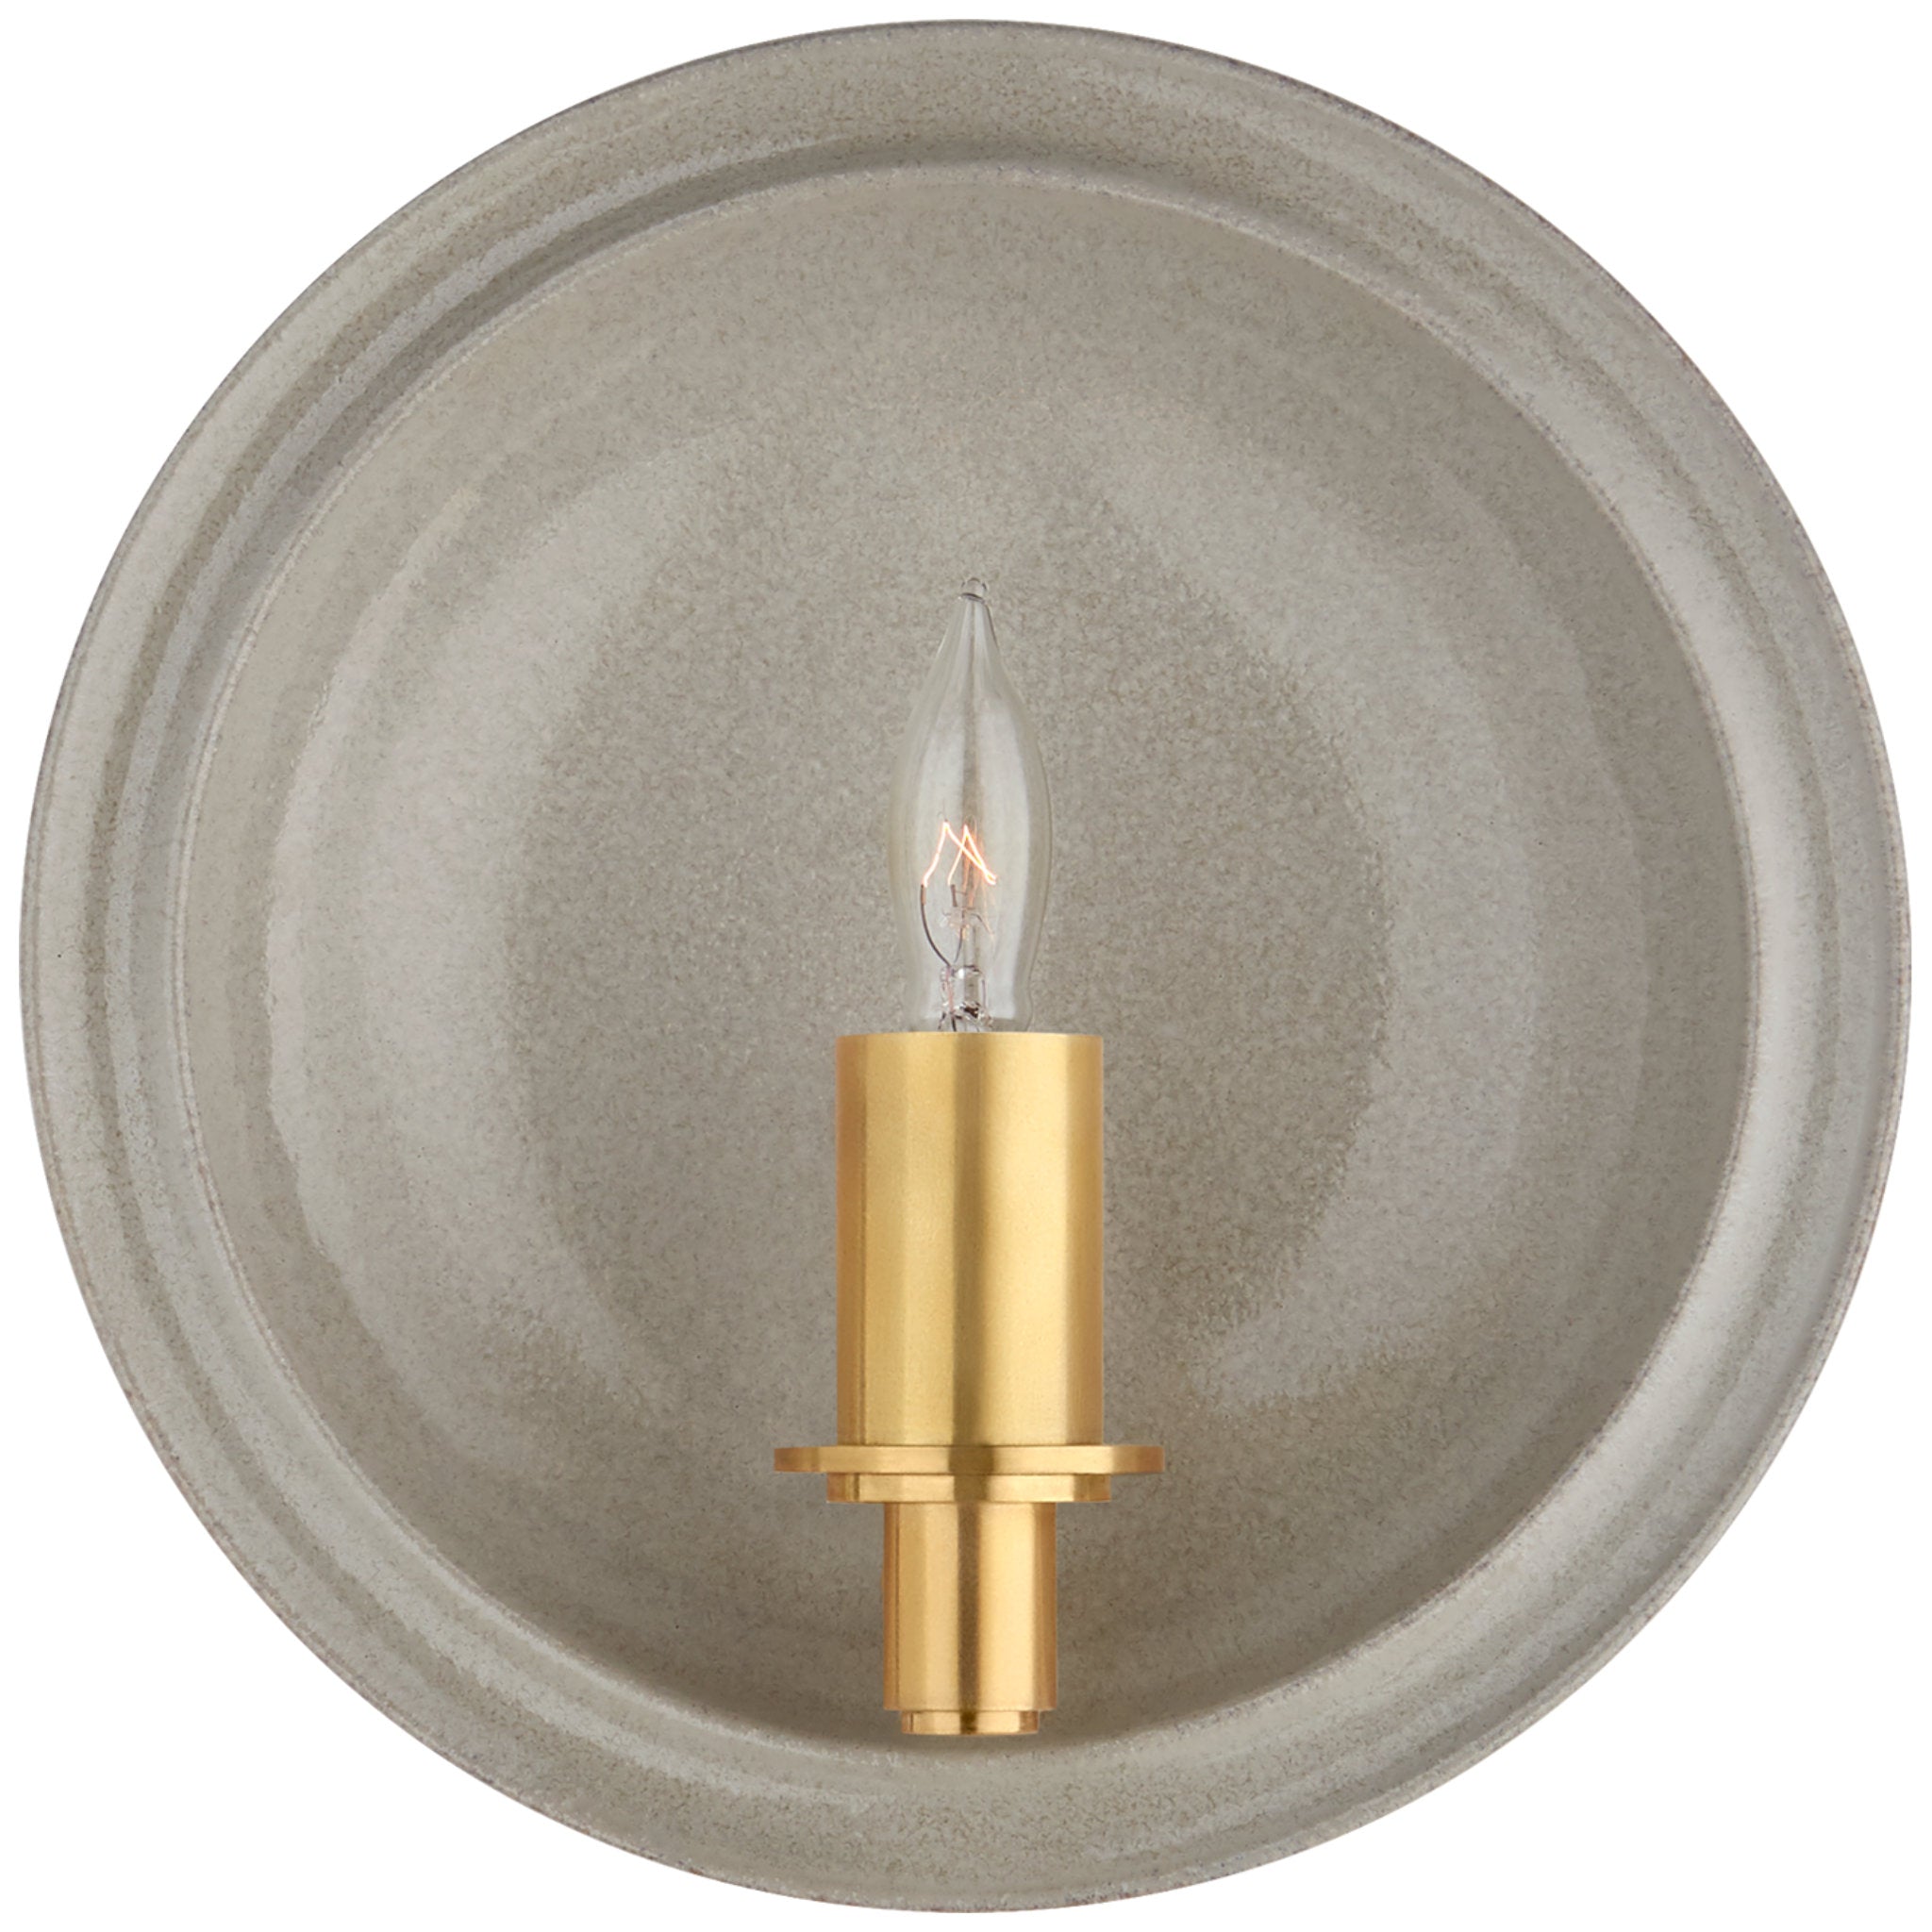 Christopher Spitzmiller Leeds Small Round Sconce in Shellish Gray